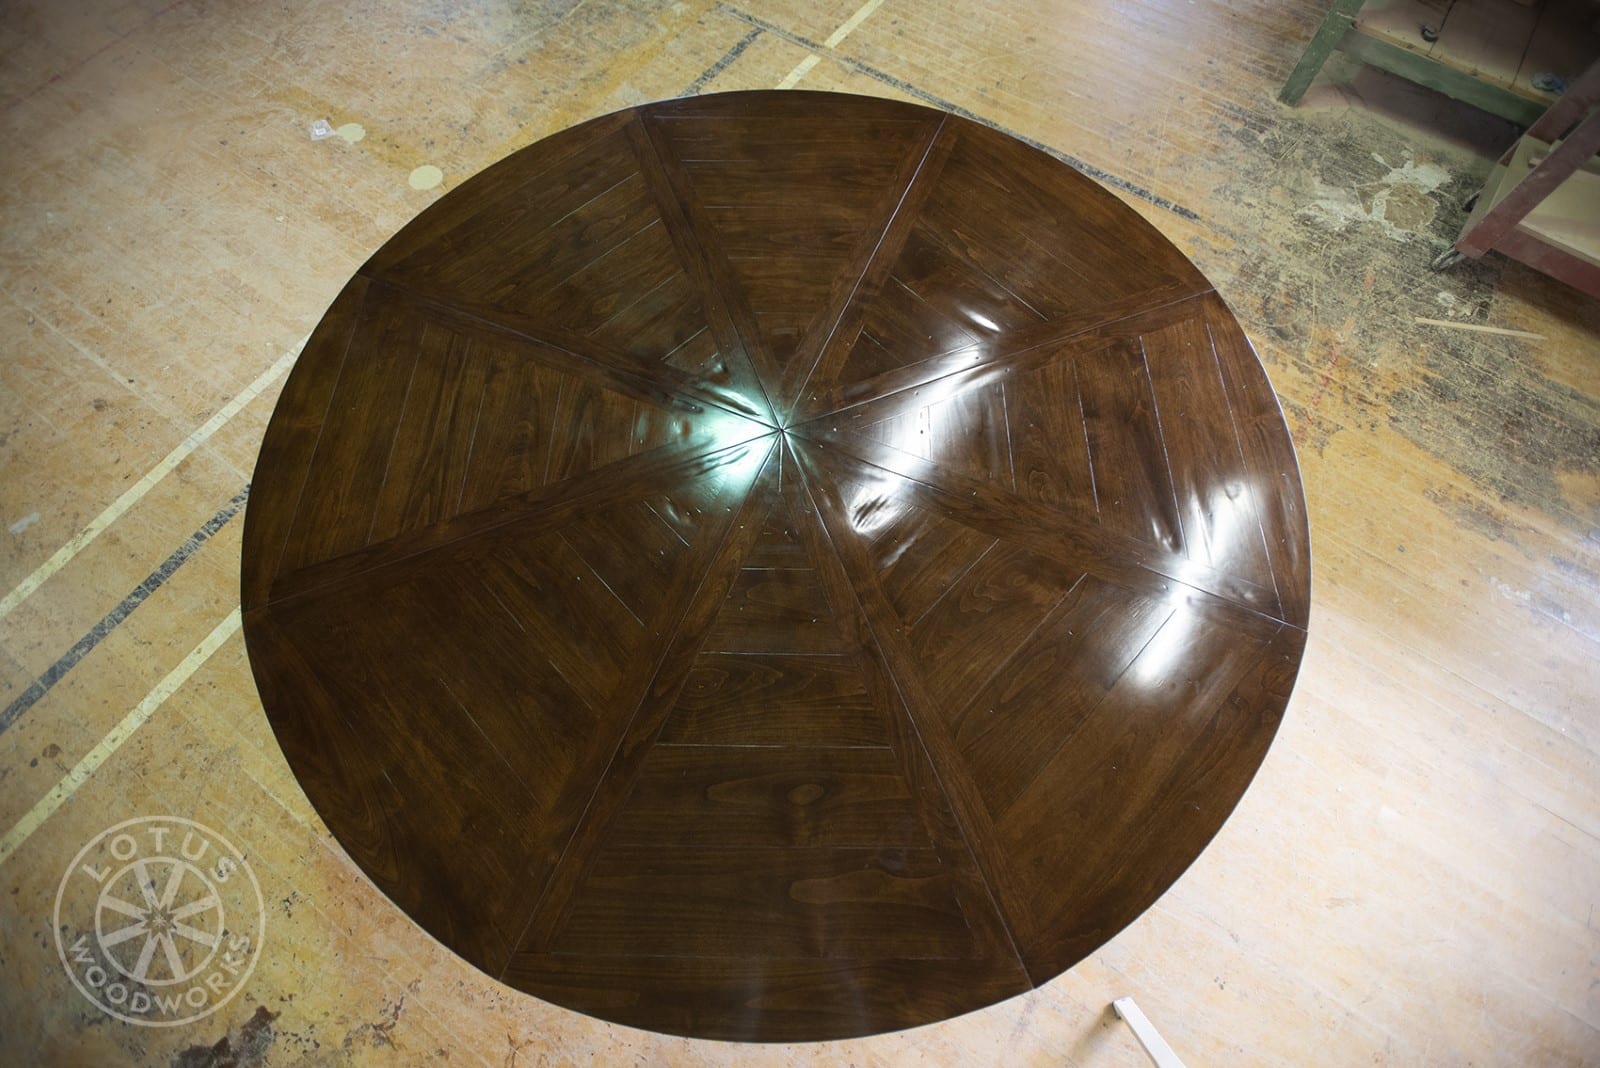 8 Leaf Expanding Round Table Top View - Coca Bean